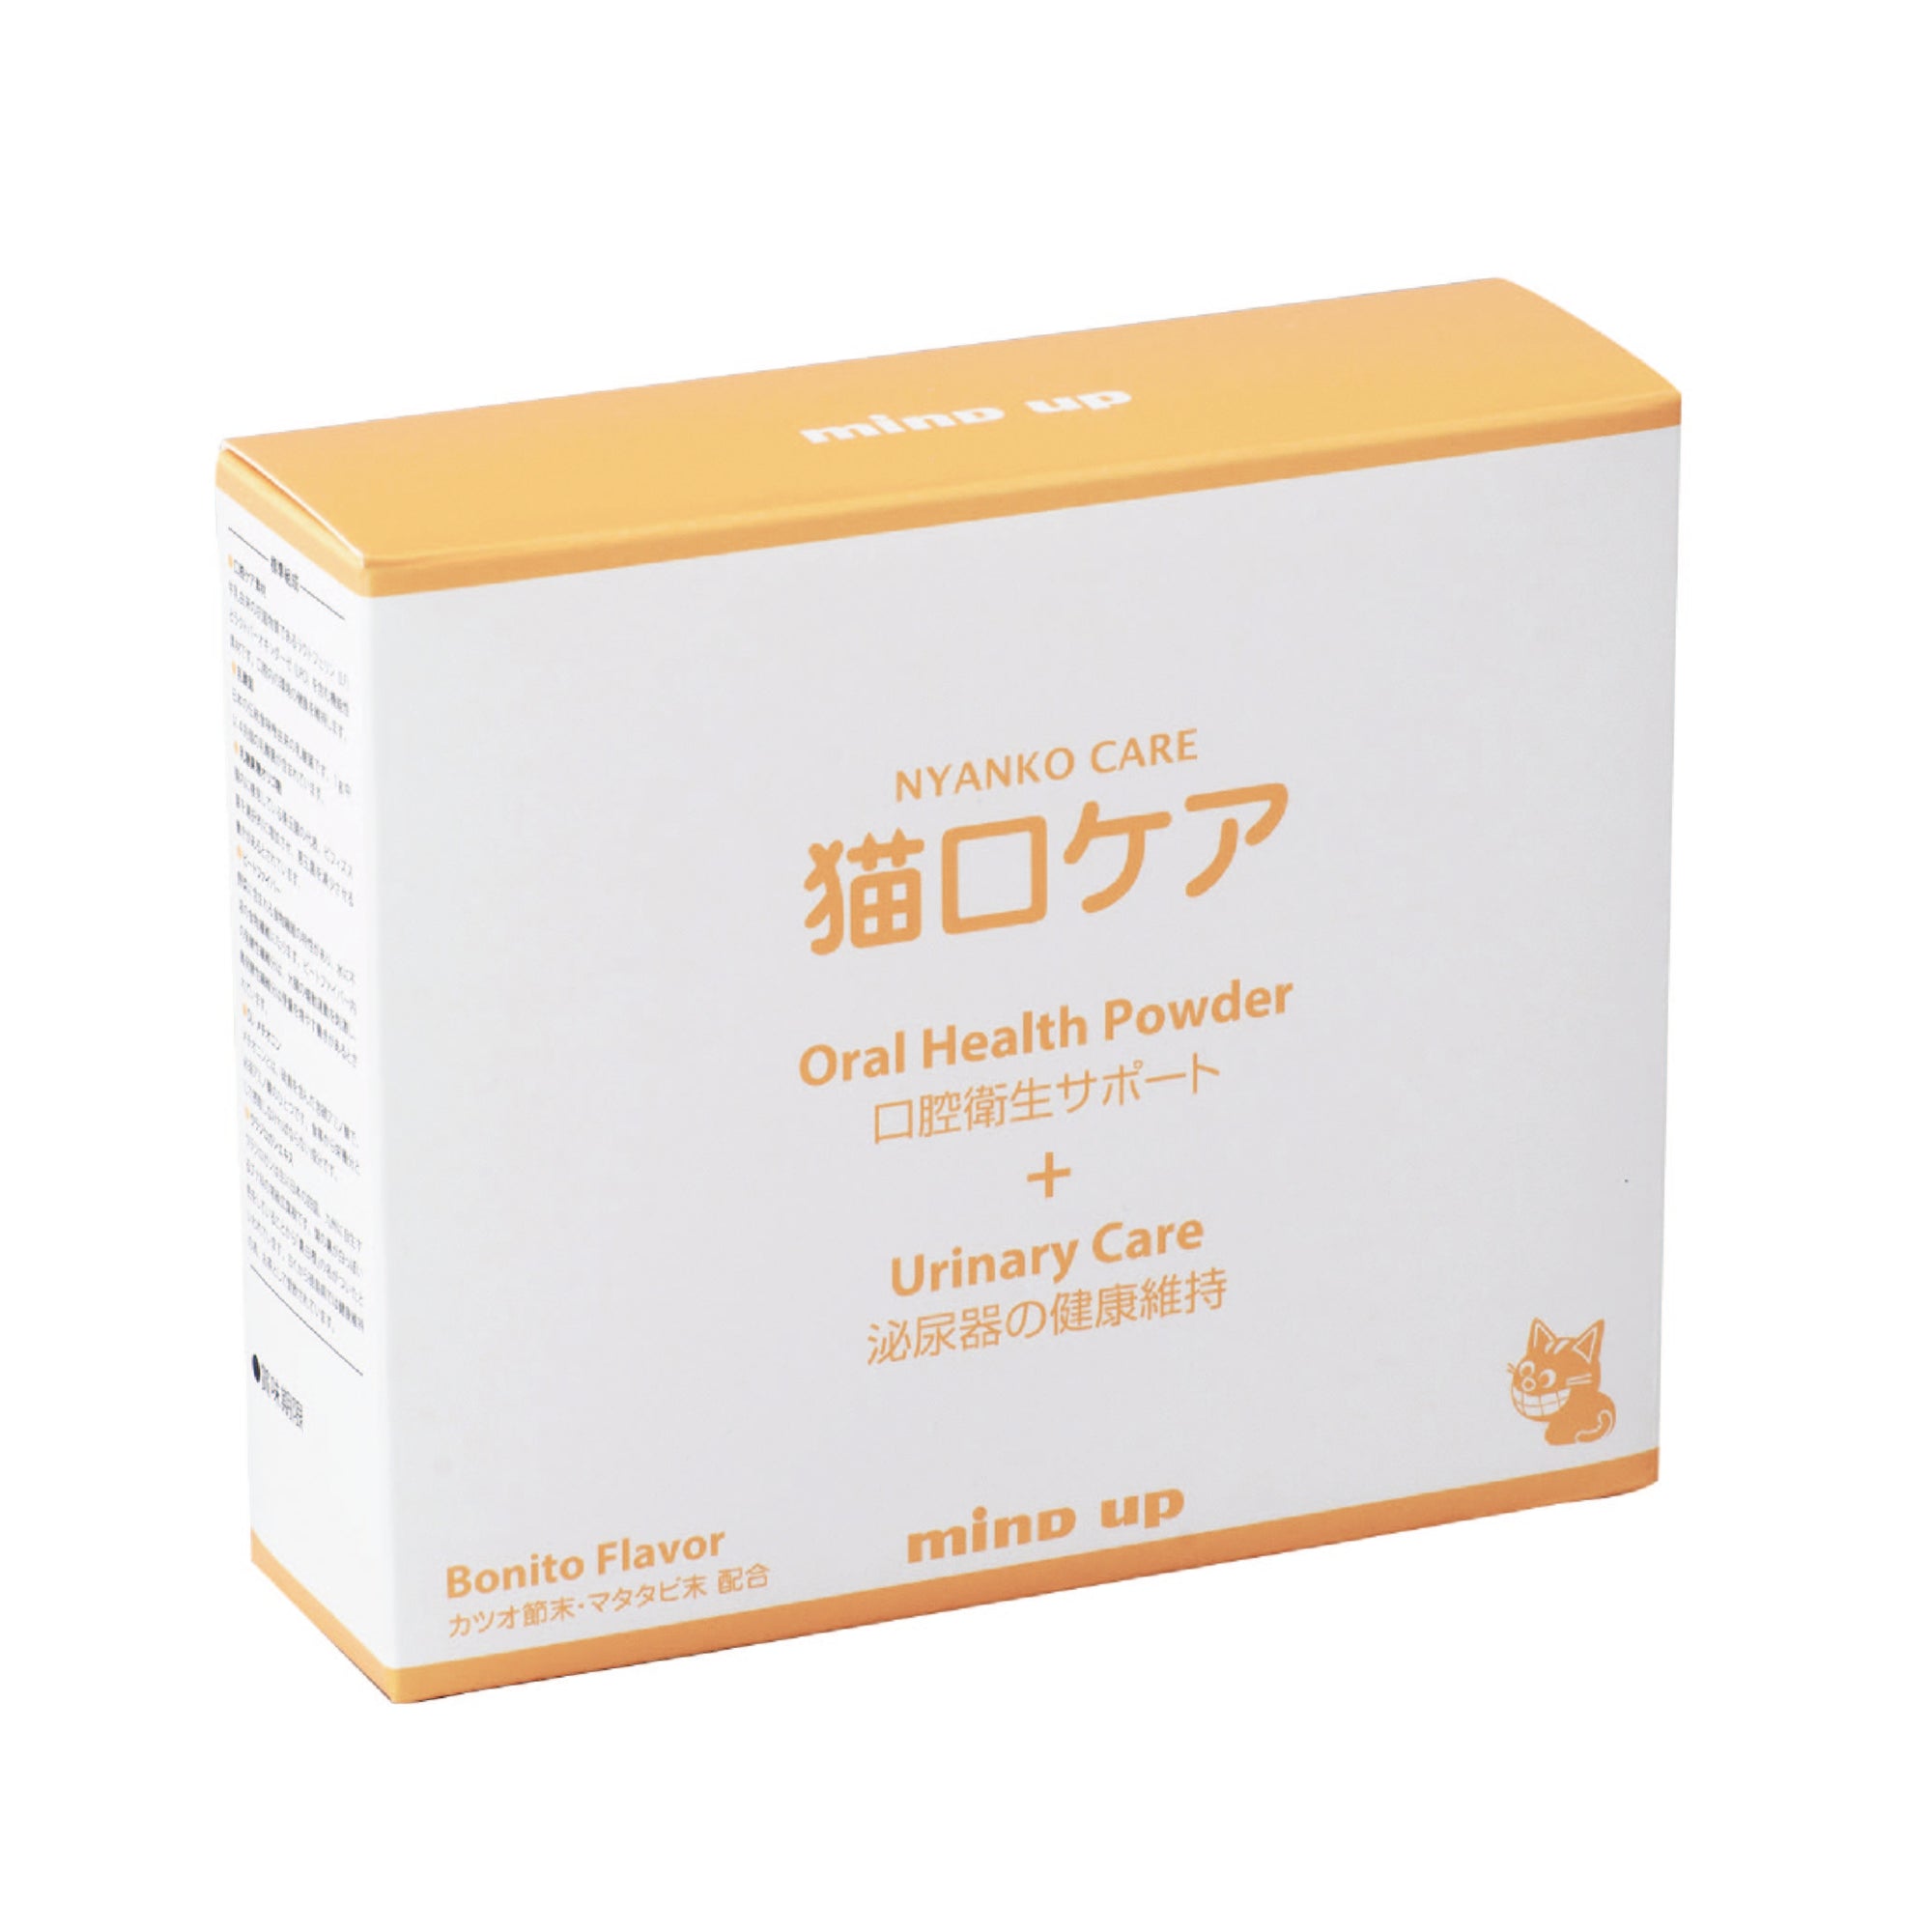 NYANKO CARE Oral Health Powder + Urinary Care Support